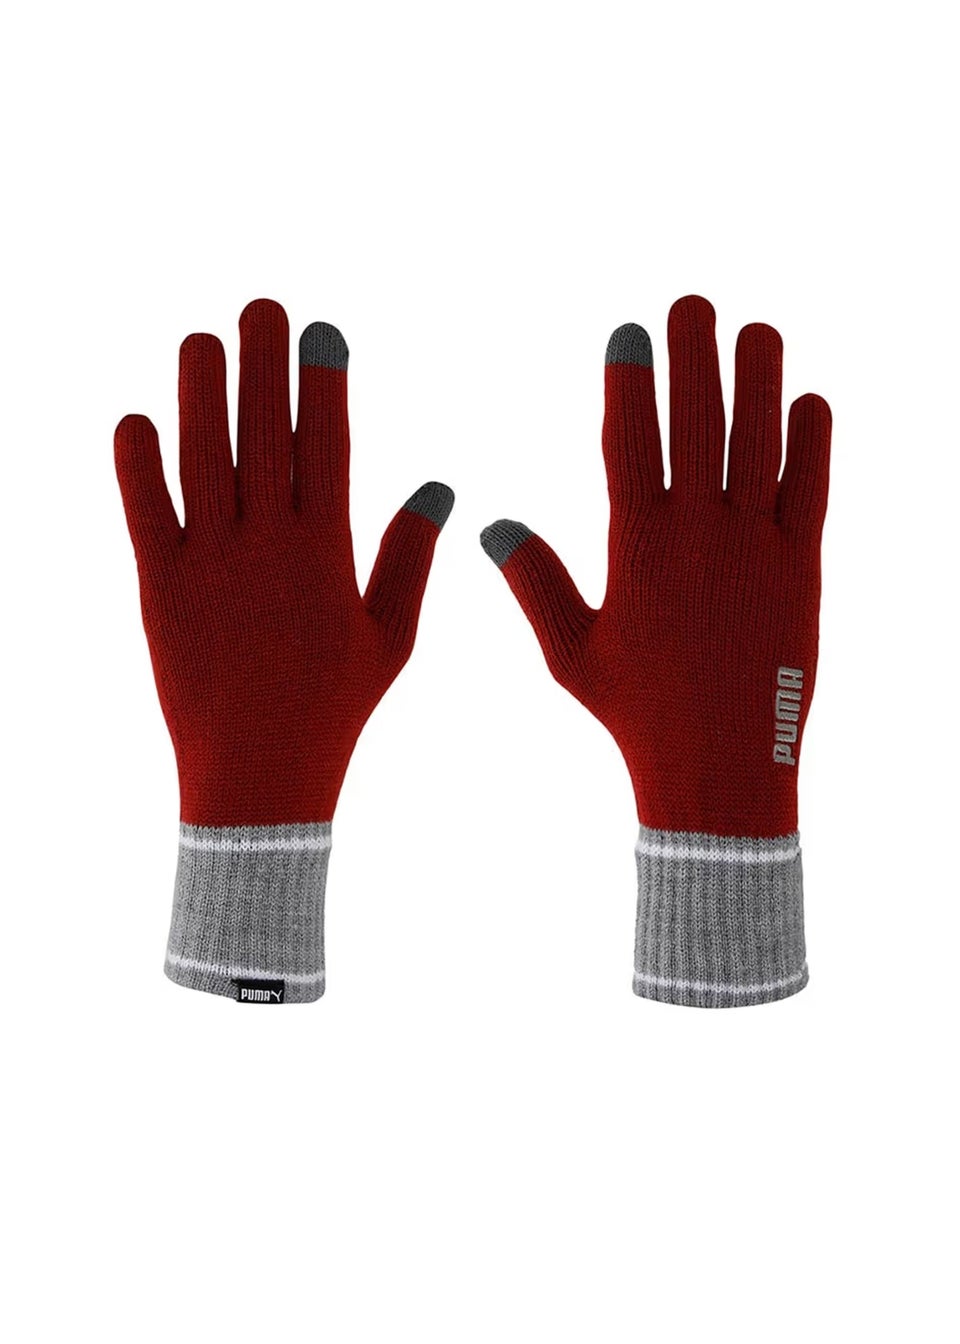 Puma Red Knitted Winter Gloves